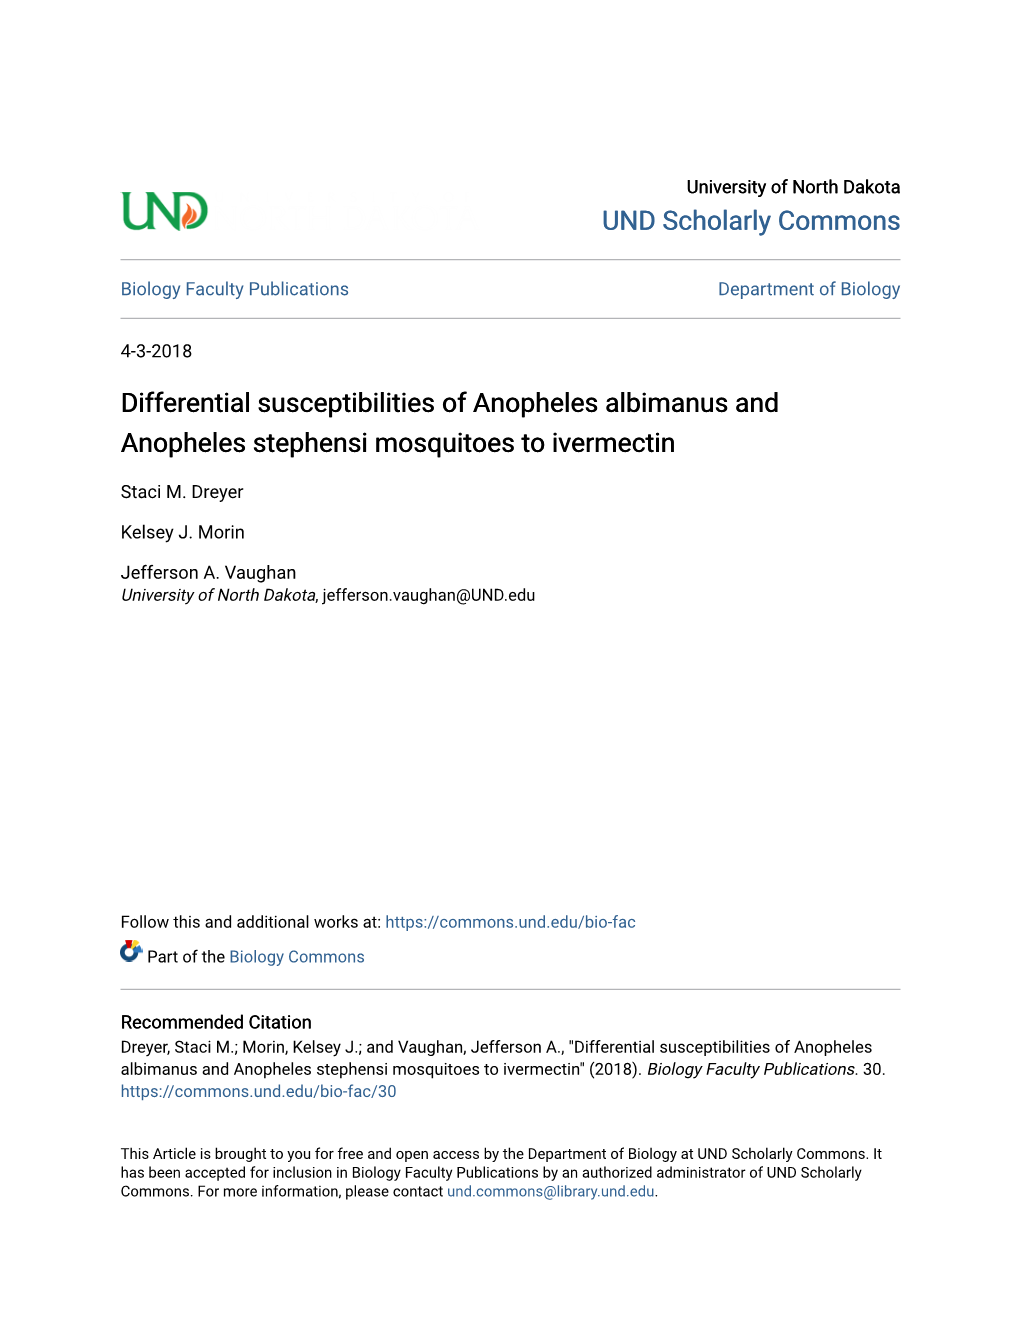 Differential Susceptibilities of Anopheles Albimanus and Anopheles Stephensi Mosquitoes to Ivermectin